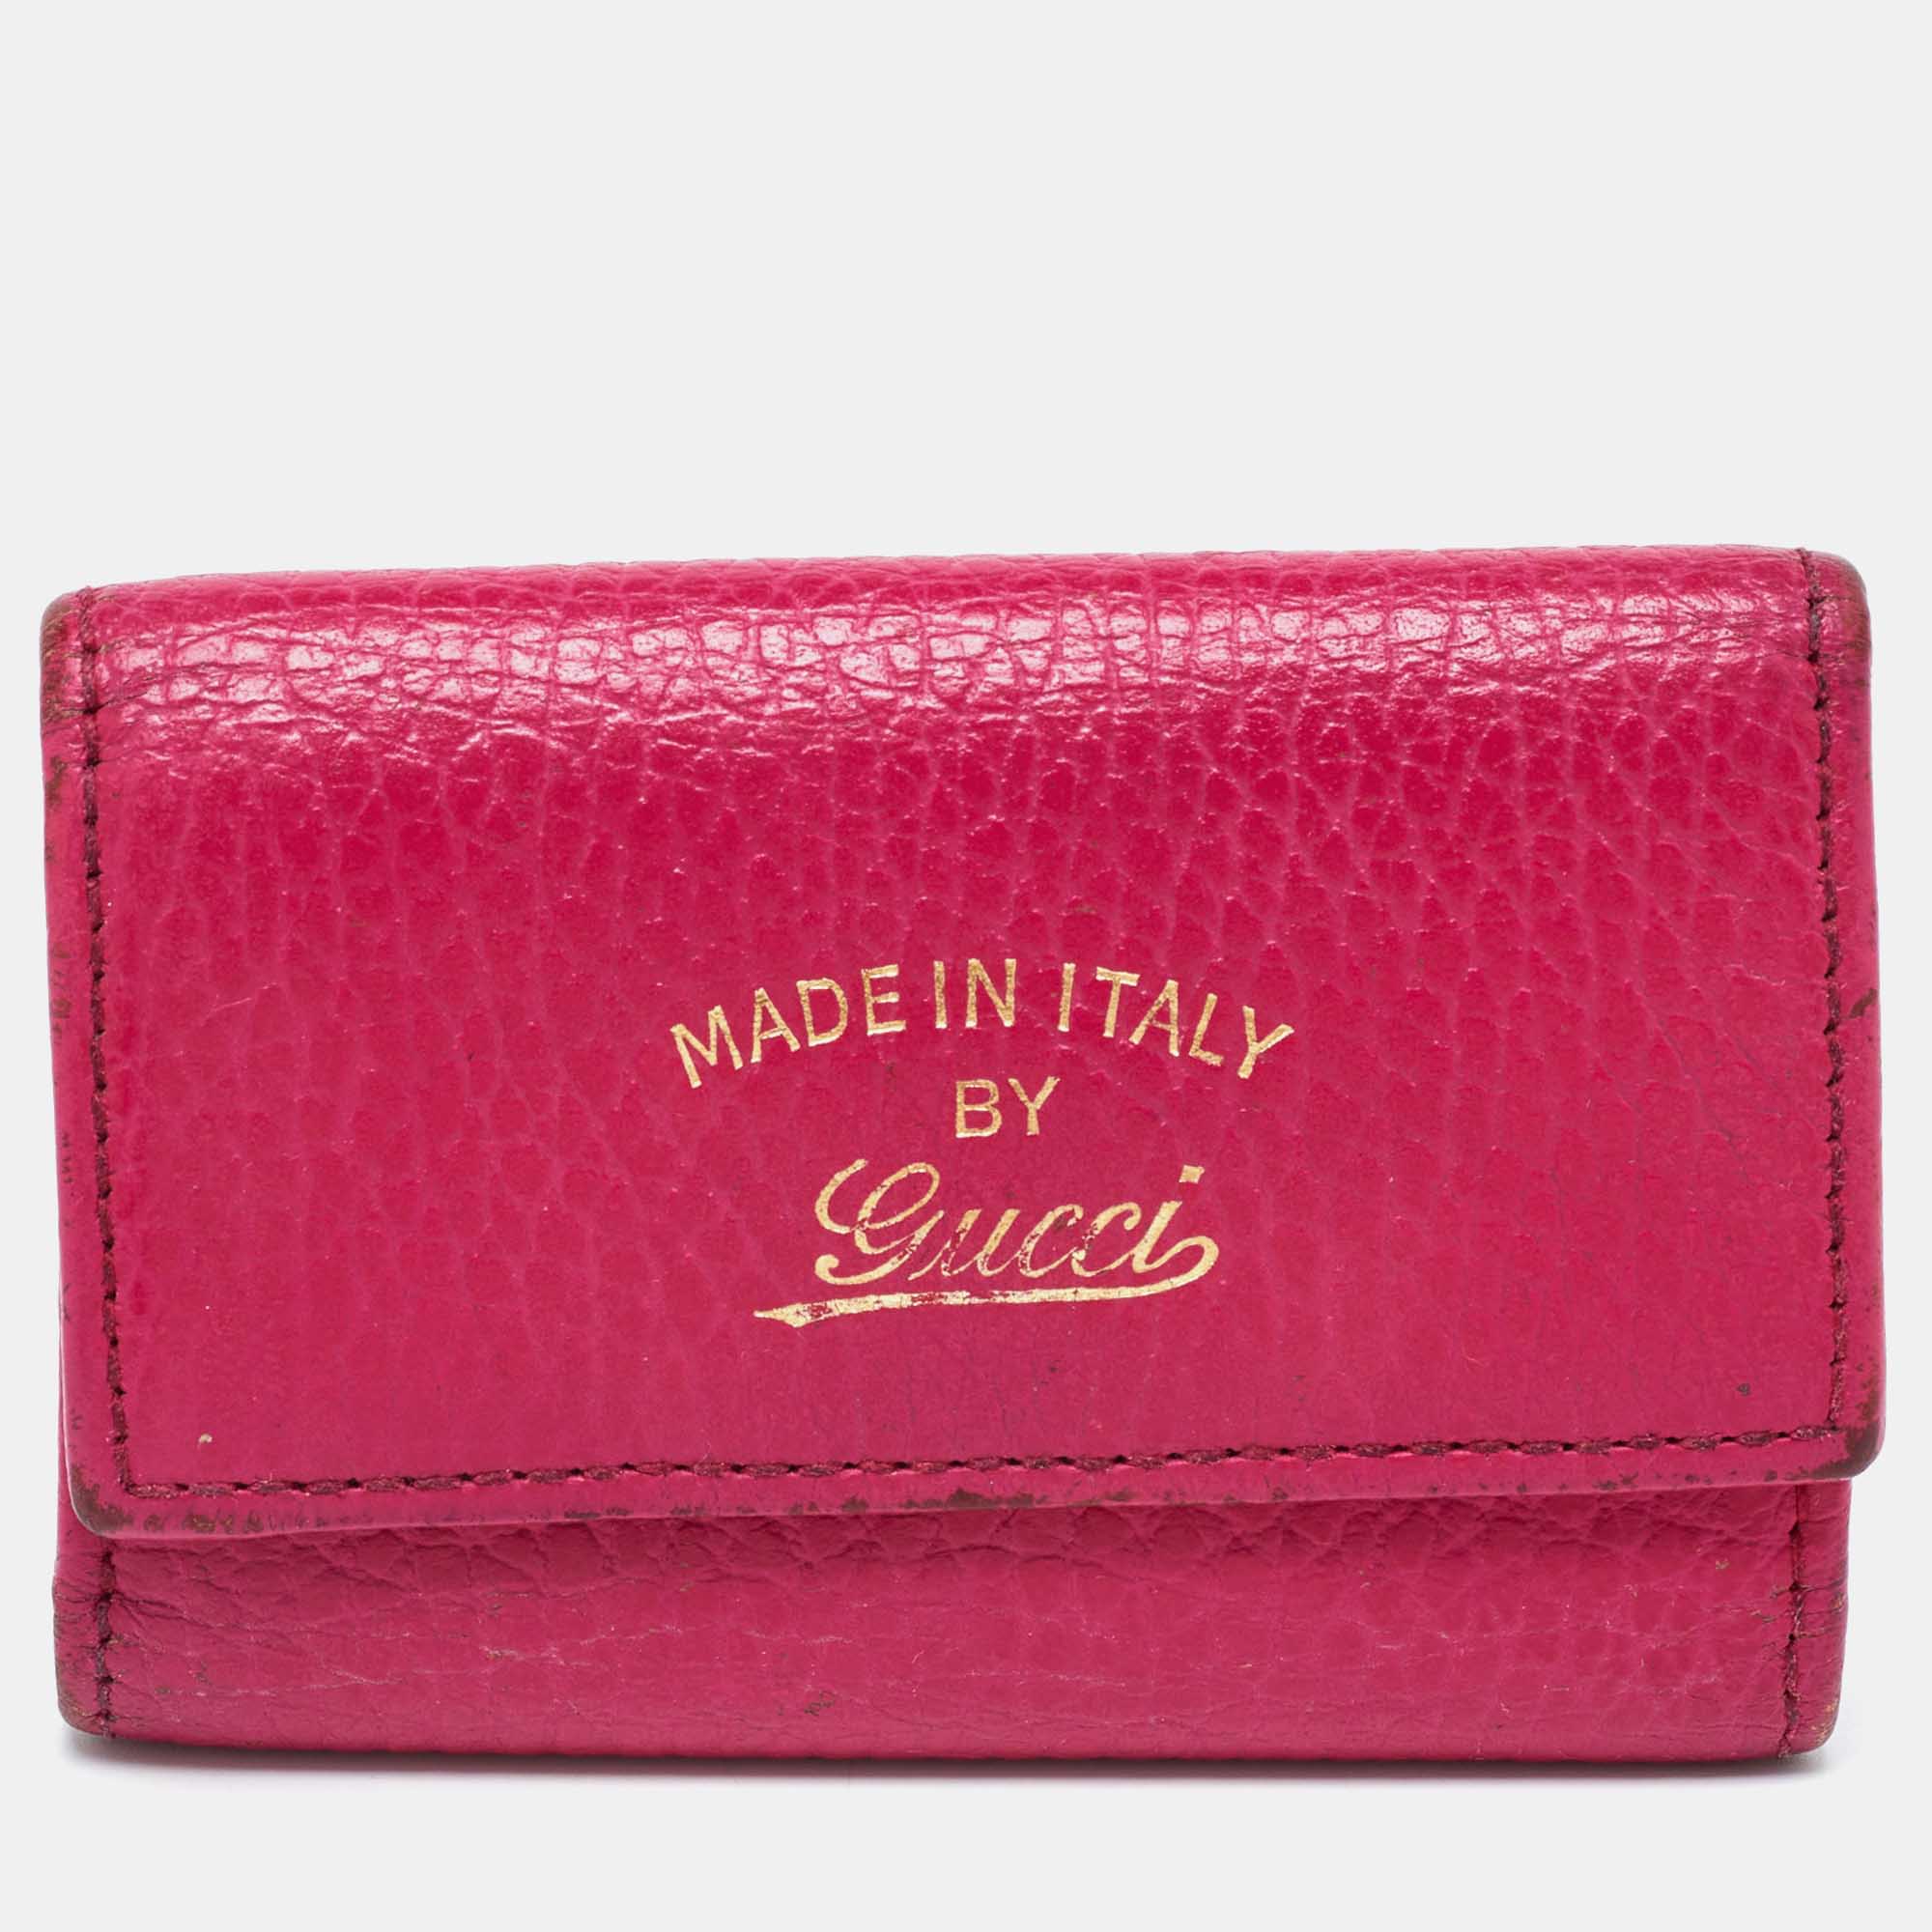 Gucci pink leather key case